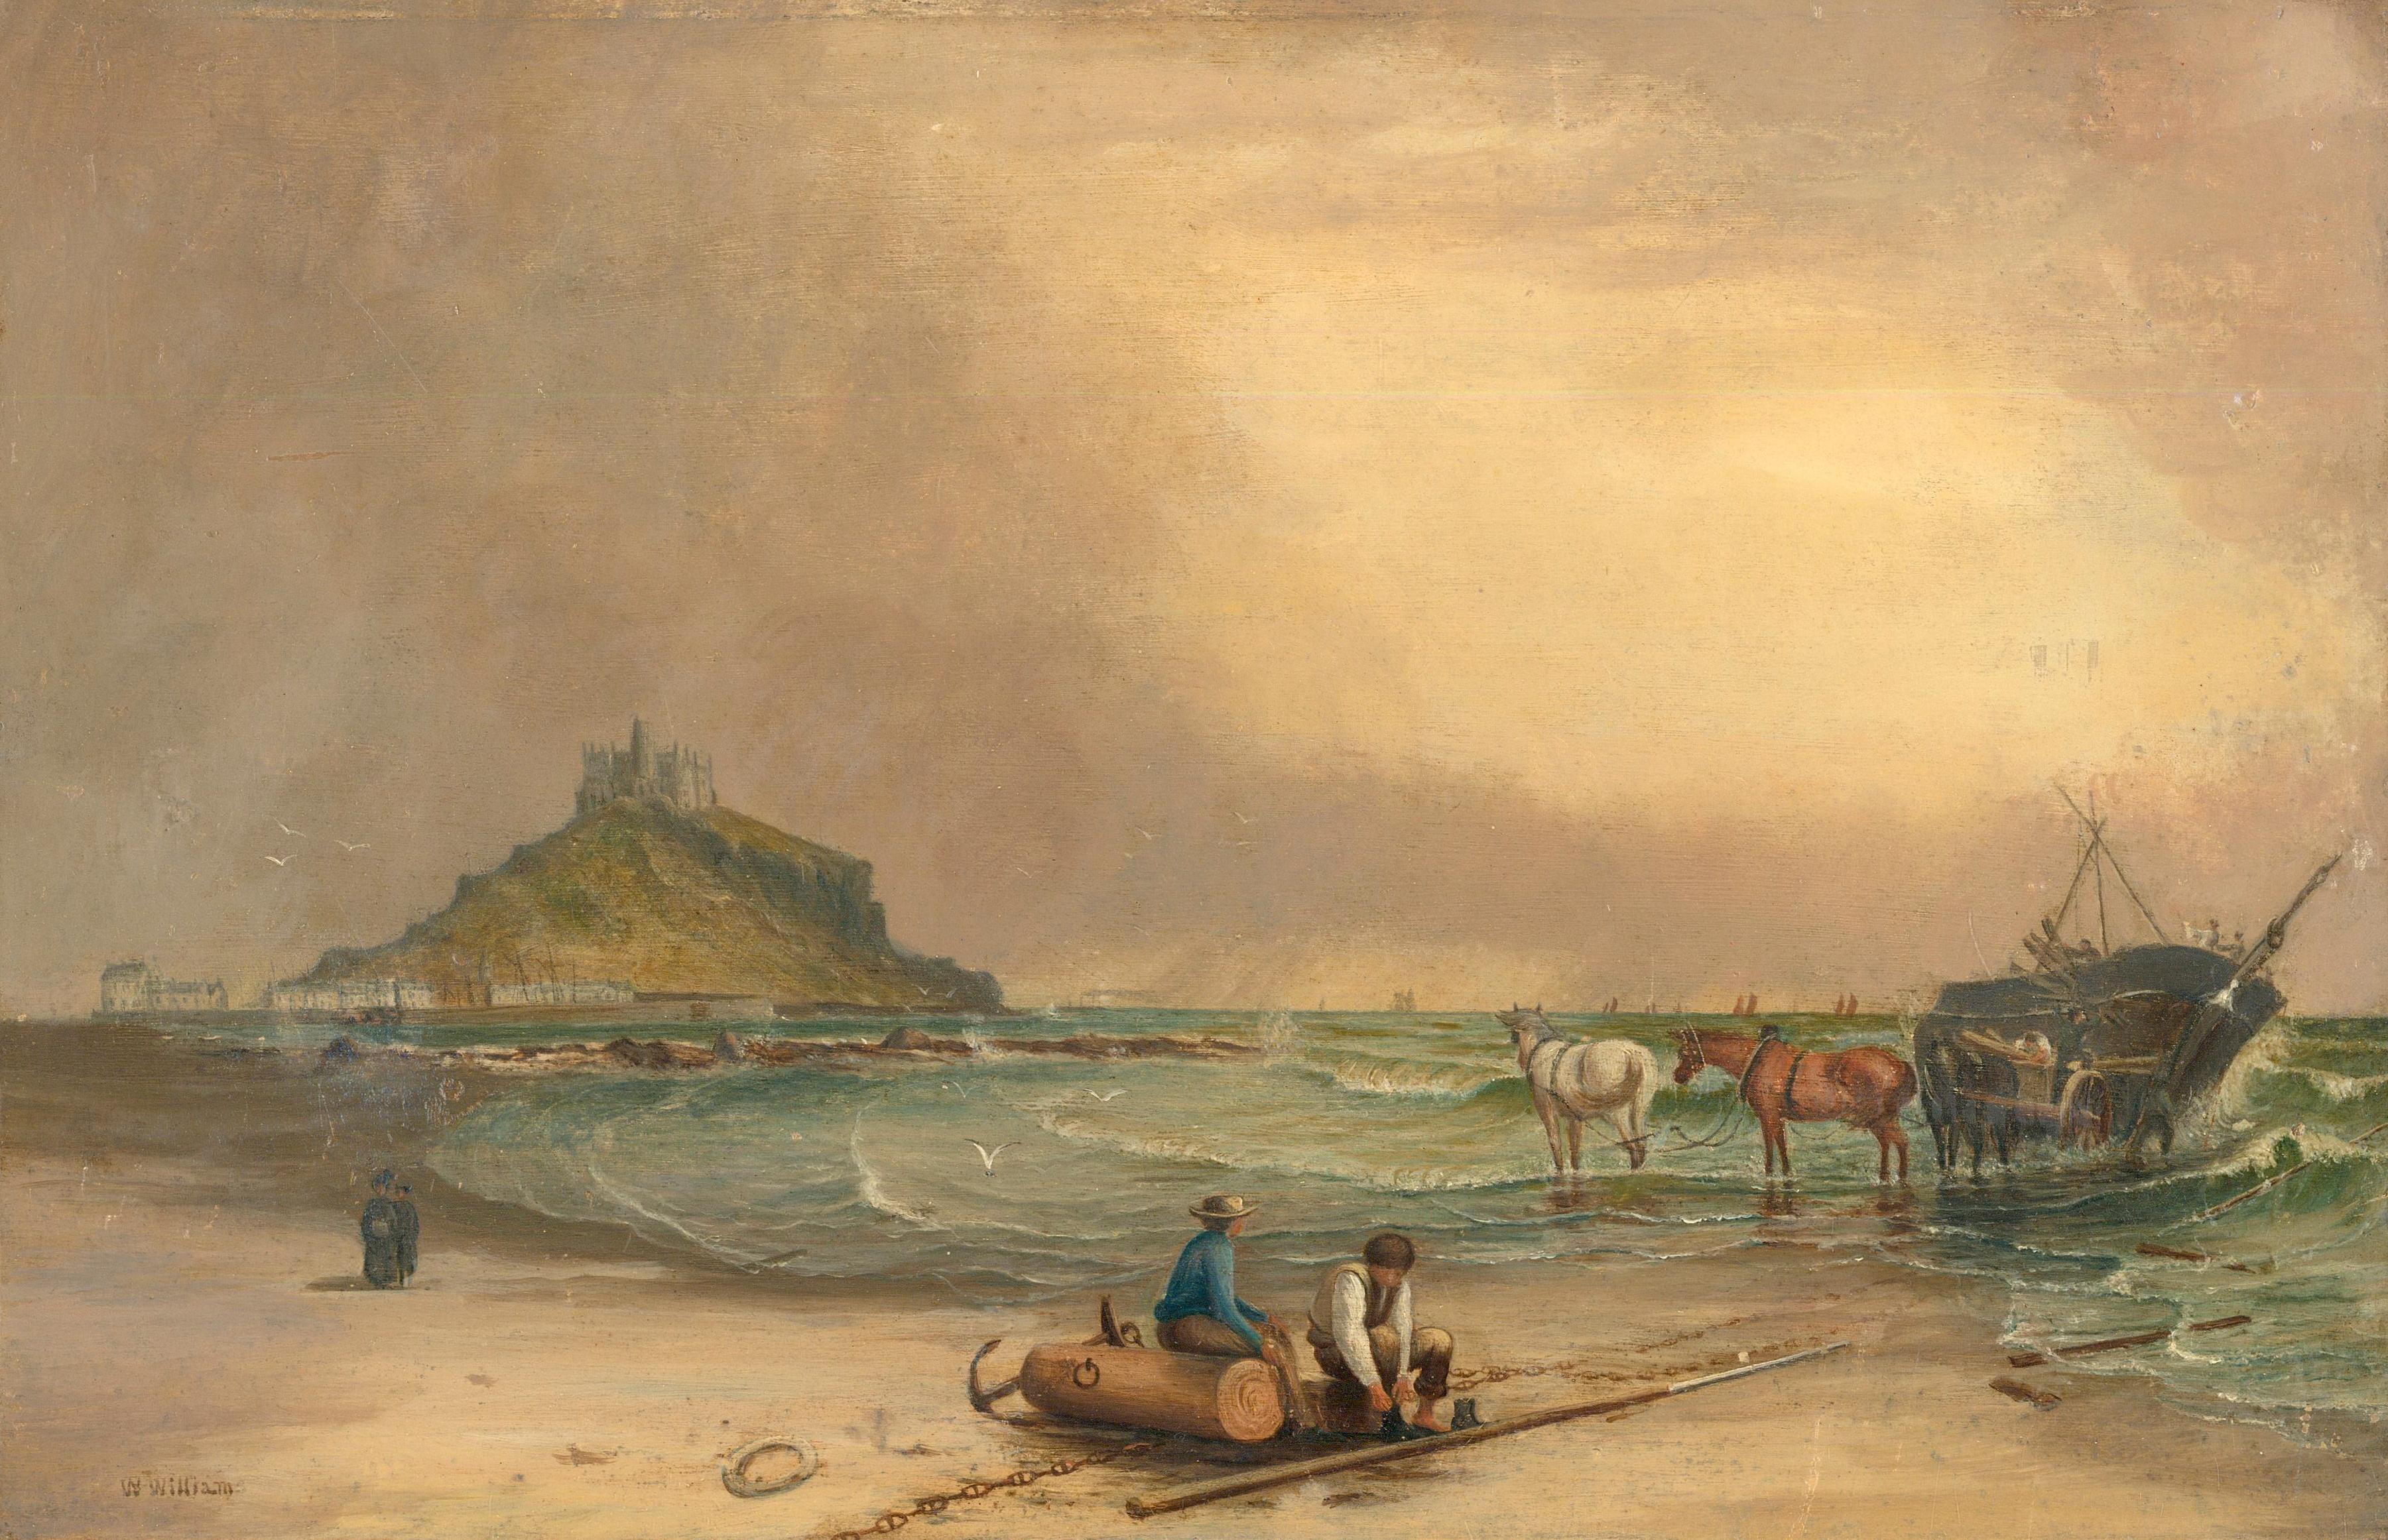 Unknown Figurative Painting - W. Williams - 19th Century Oil, Boat Repairs in Mount's Bay